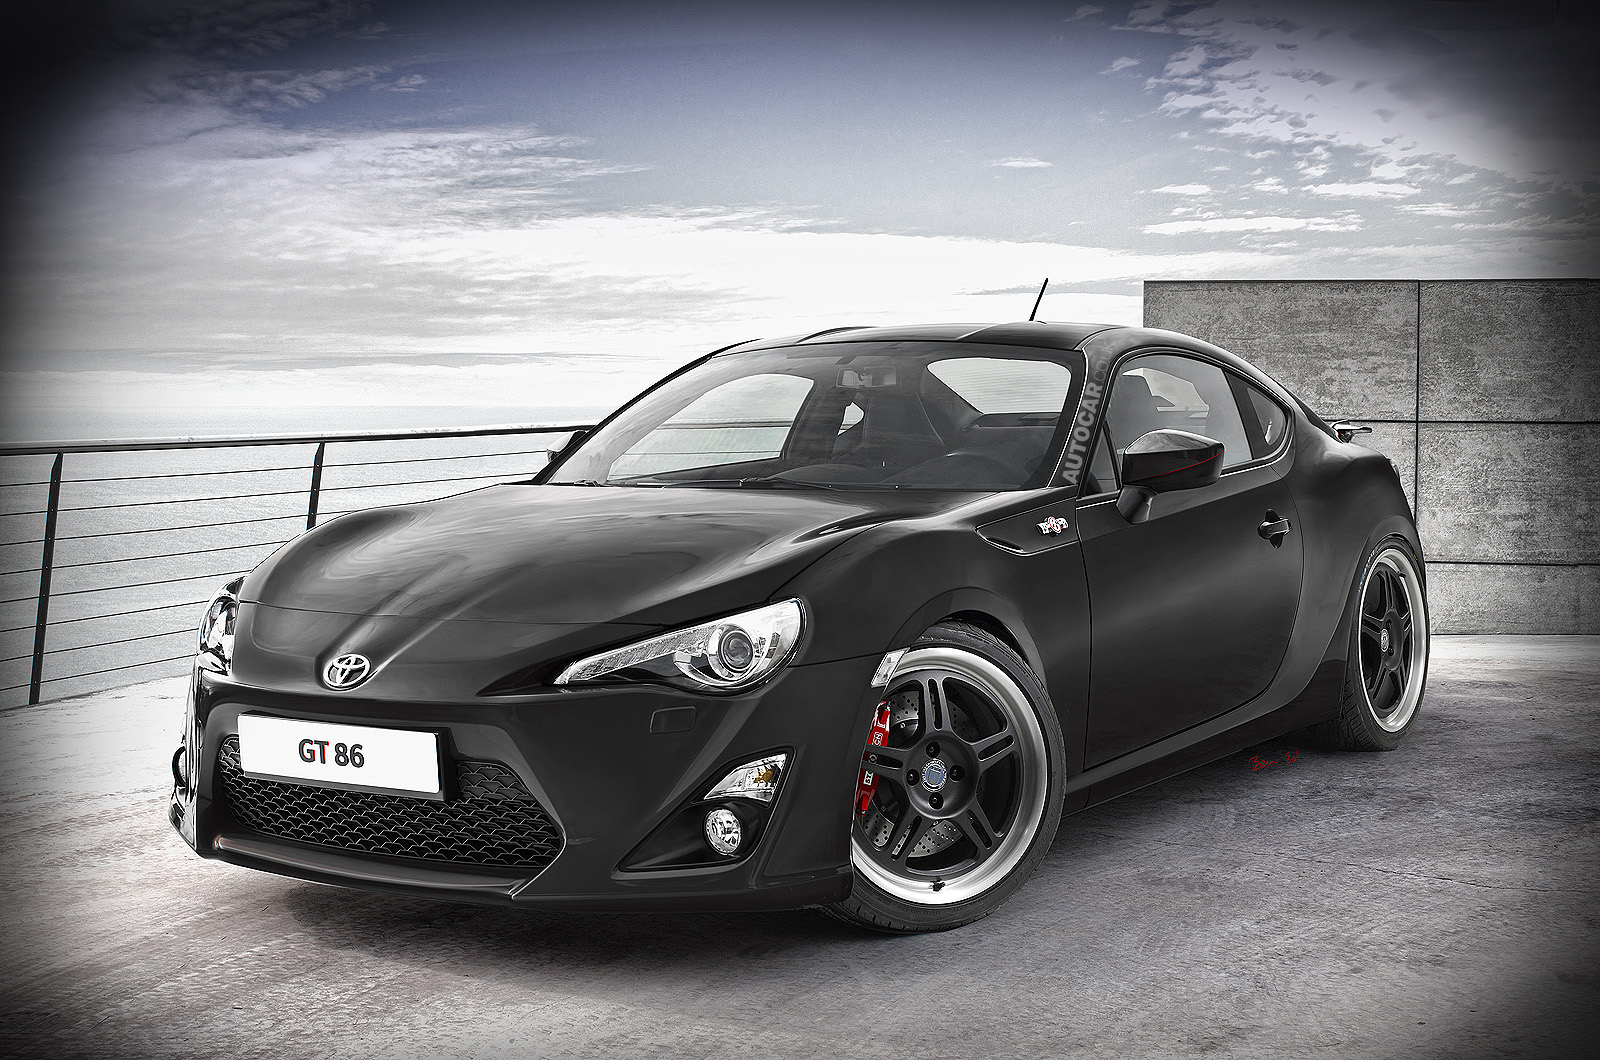 Hot Toyota Gt 86 Planned Autocar